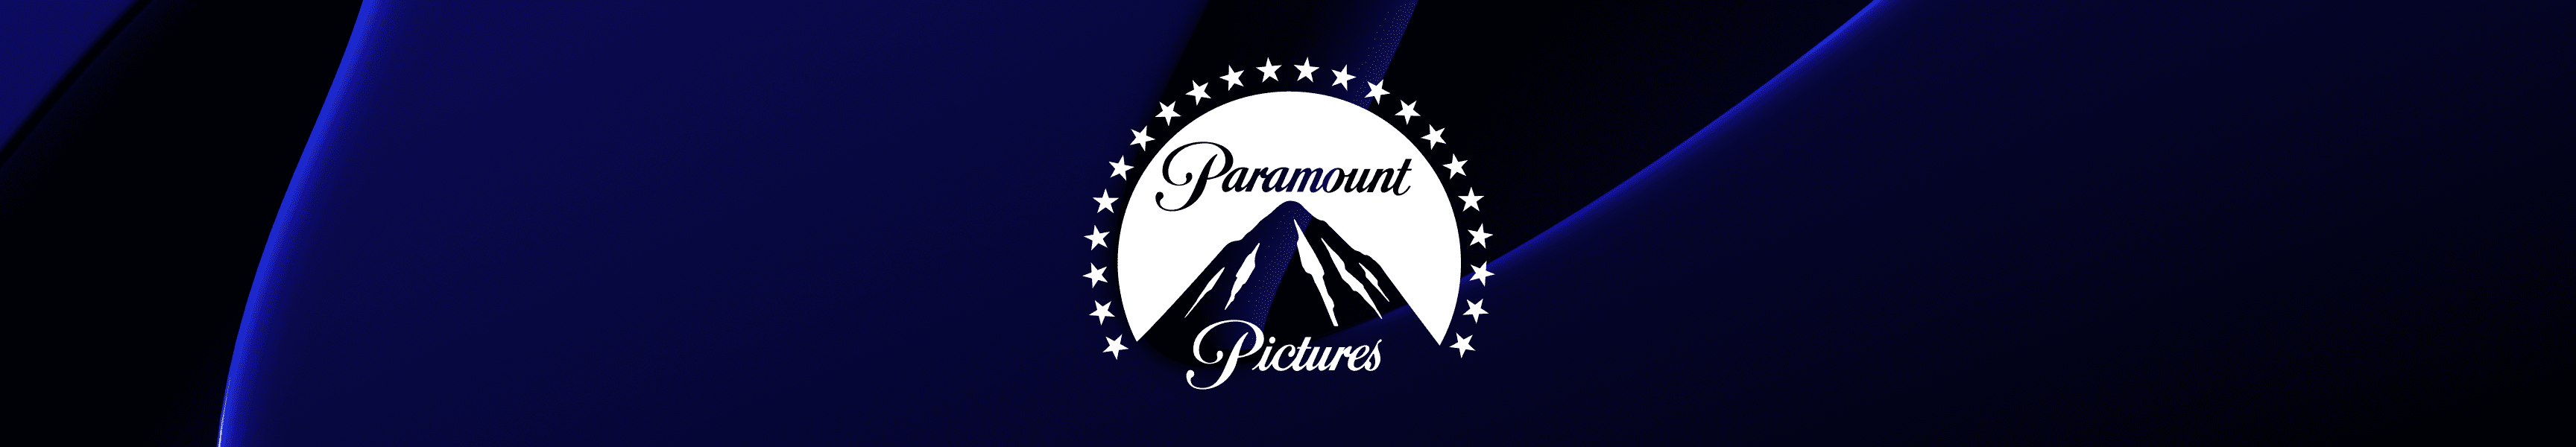 Paramount Pictures Spielzeuge